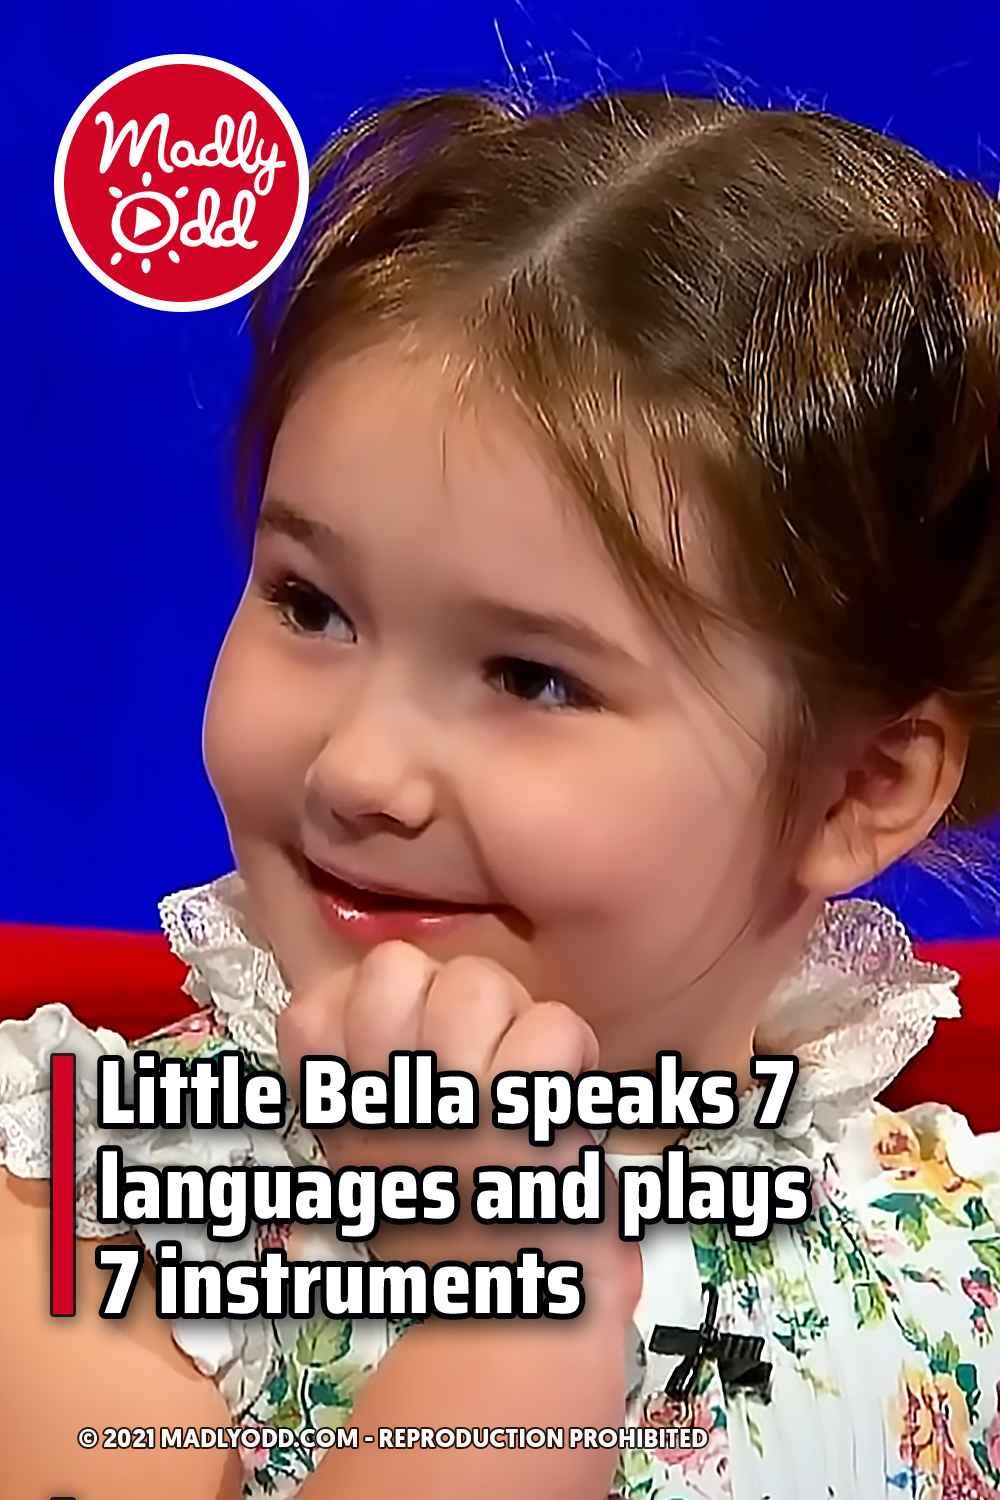 Little Bella speaks 7 languages and plays 7 instruments